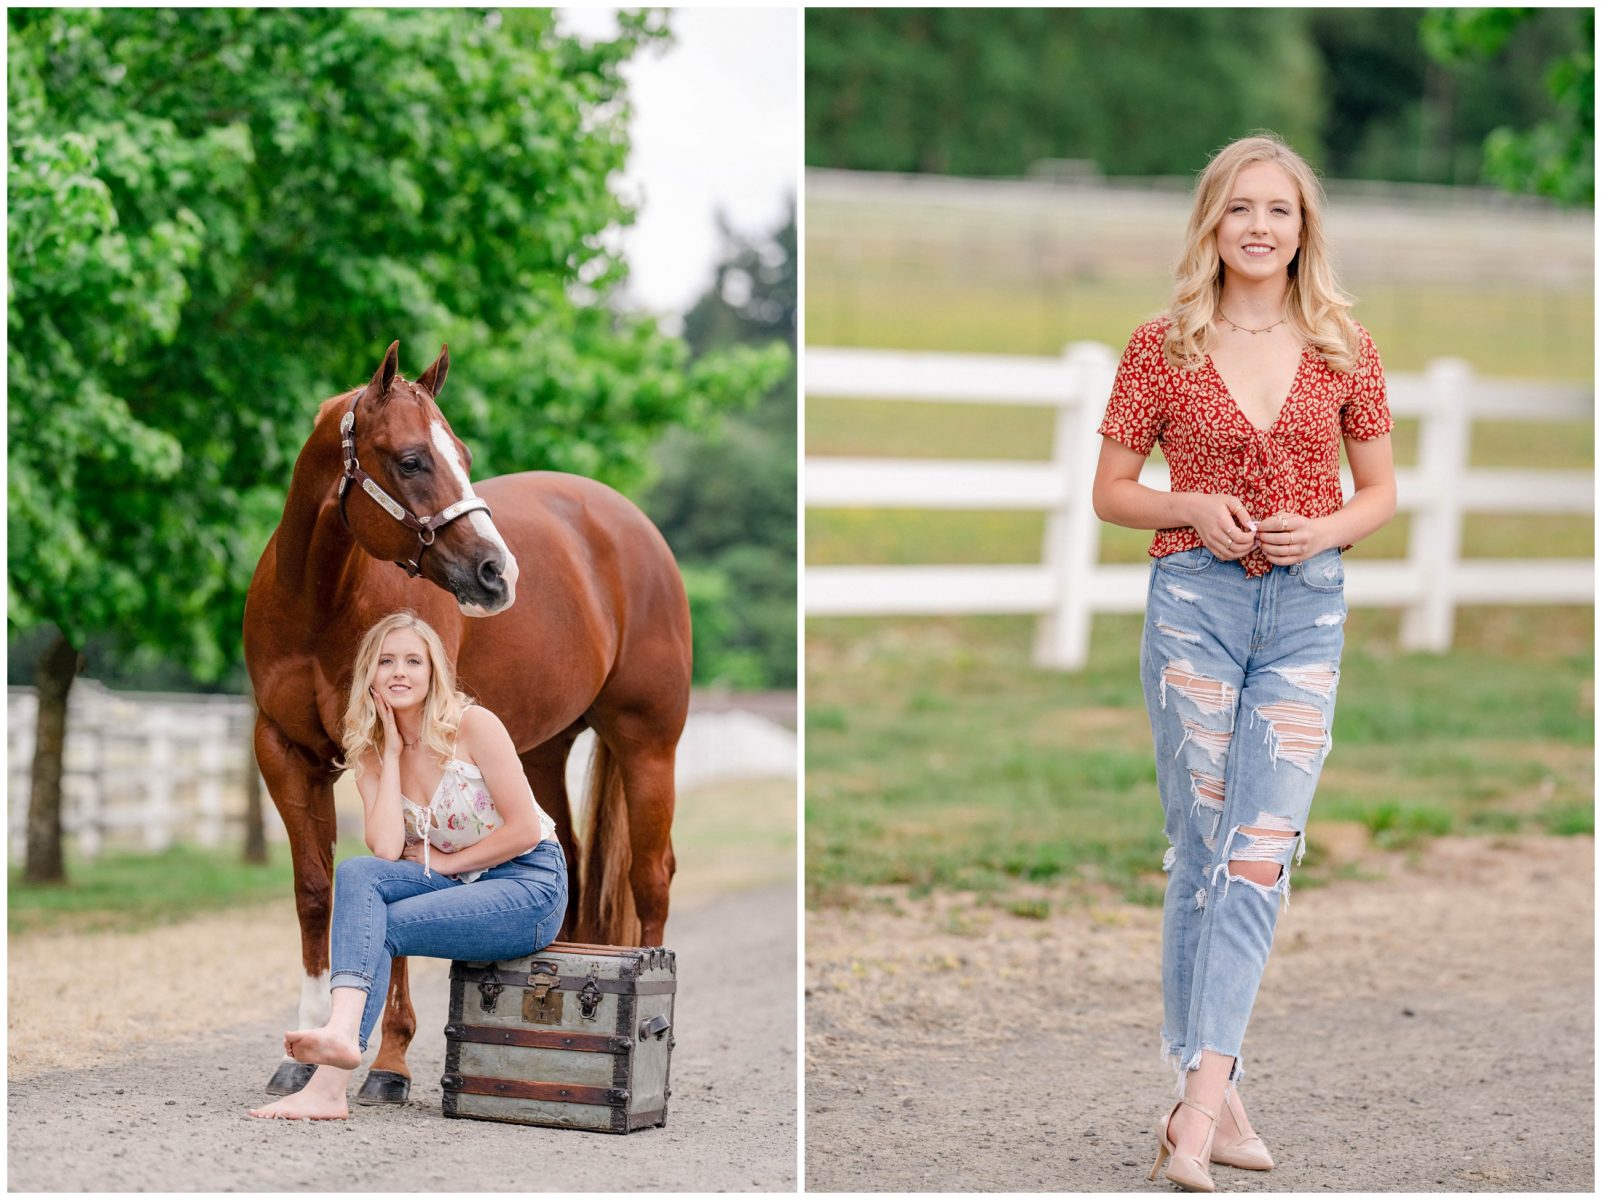 http://kirstiemarie.com/wp-content/uploads/2019/09/Jacqueline-Potwora-AQHYA-champion-The-Absolute-Best-McCulloch-Training-Stable-Equestrian-Kirstie-Marie-Photography_0005-1.jpg